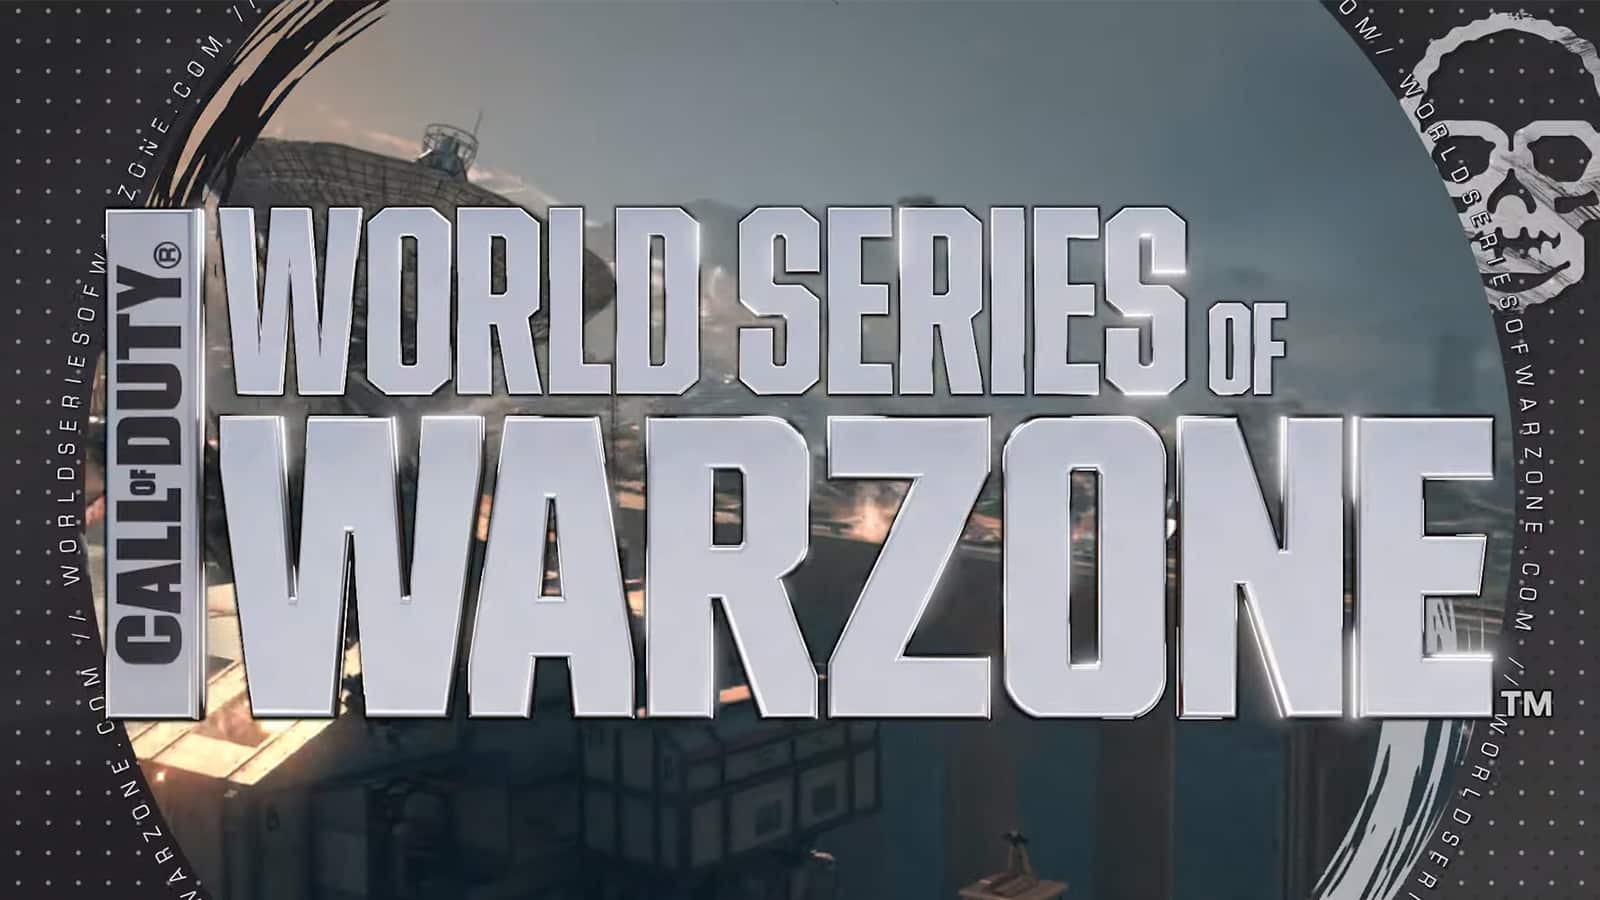 world series of warzone